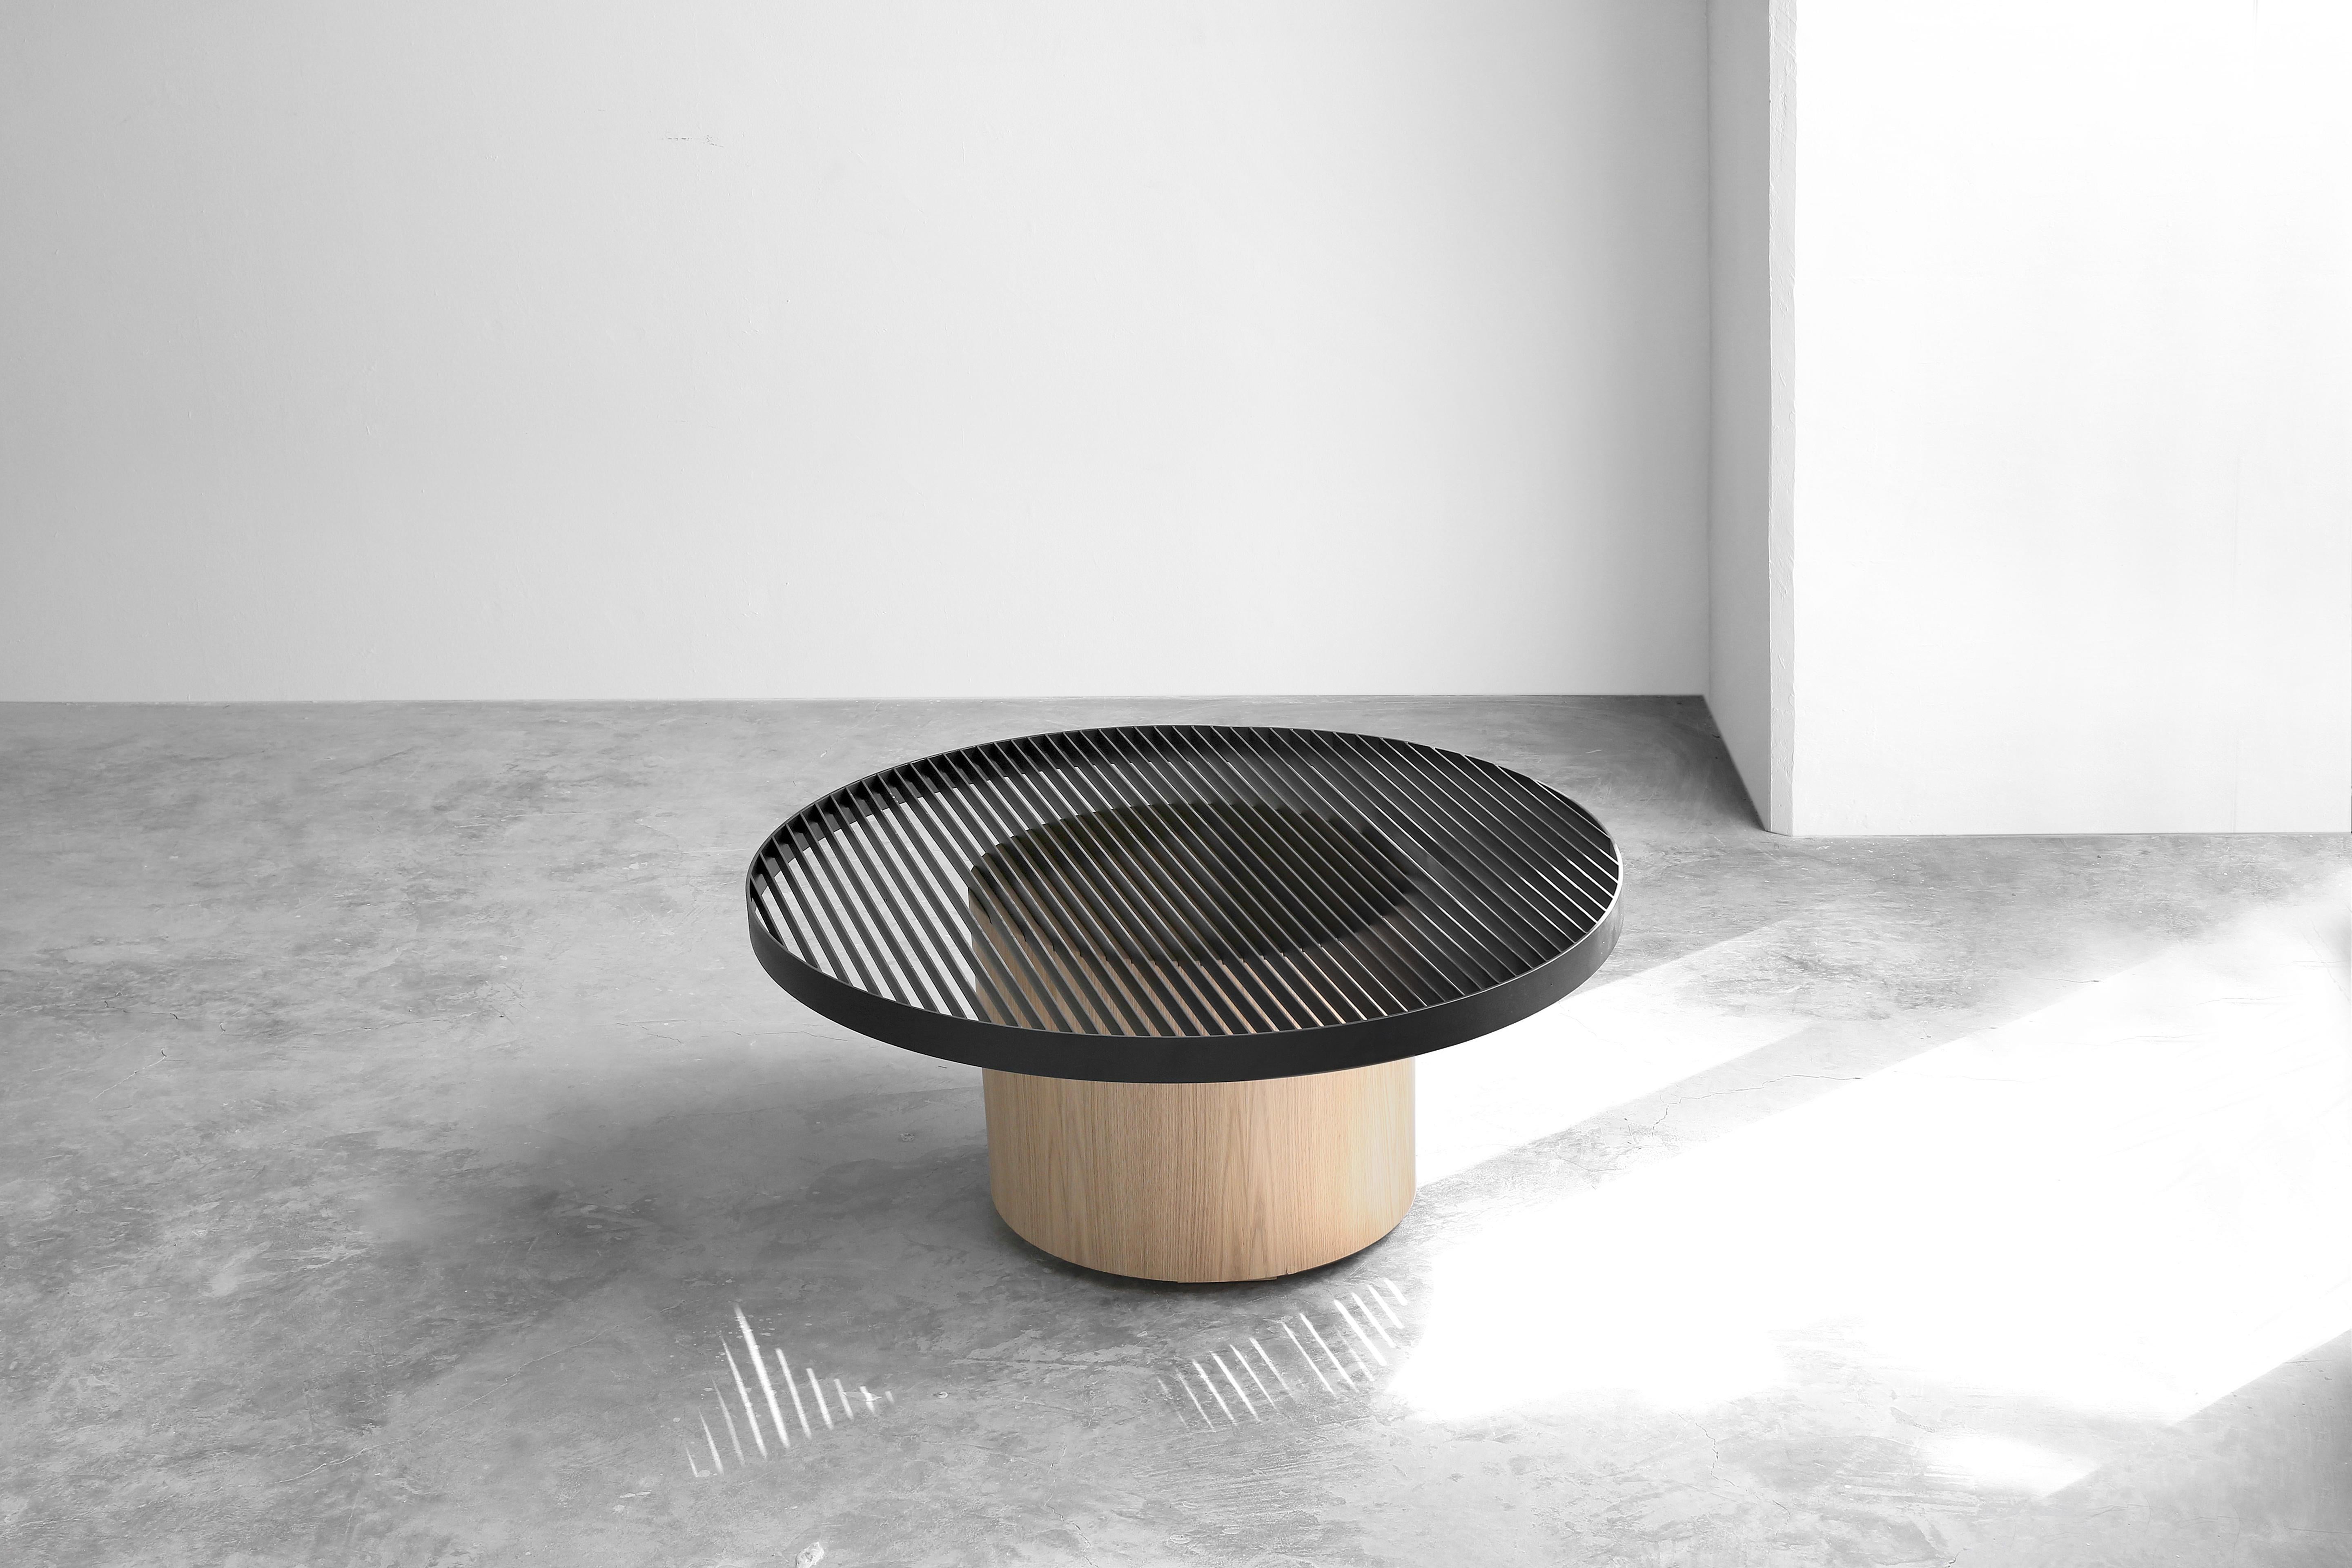 Round Movimiento coffee table by Joel Escalona
Limited Edition of 9
Dimensions: D 100 x H 41 cm
Materials: oak wood, metal.

Natural white oak with metal table.

Joel Escalona
He was born in Mexico City and studied Industrial Design at the